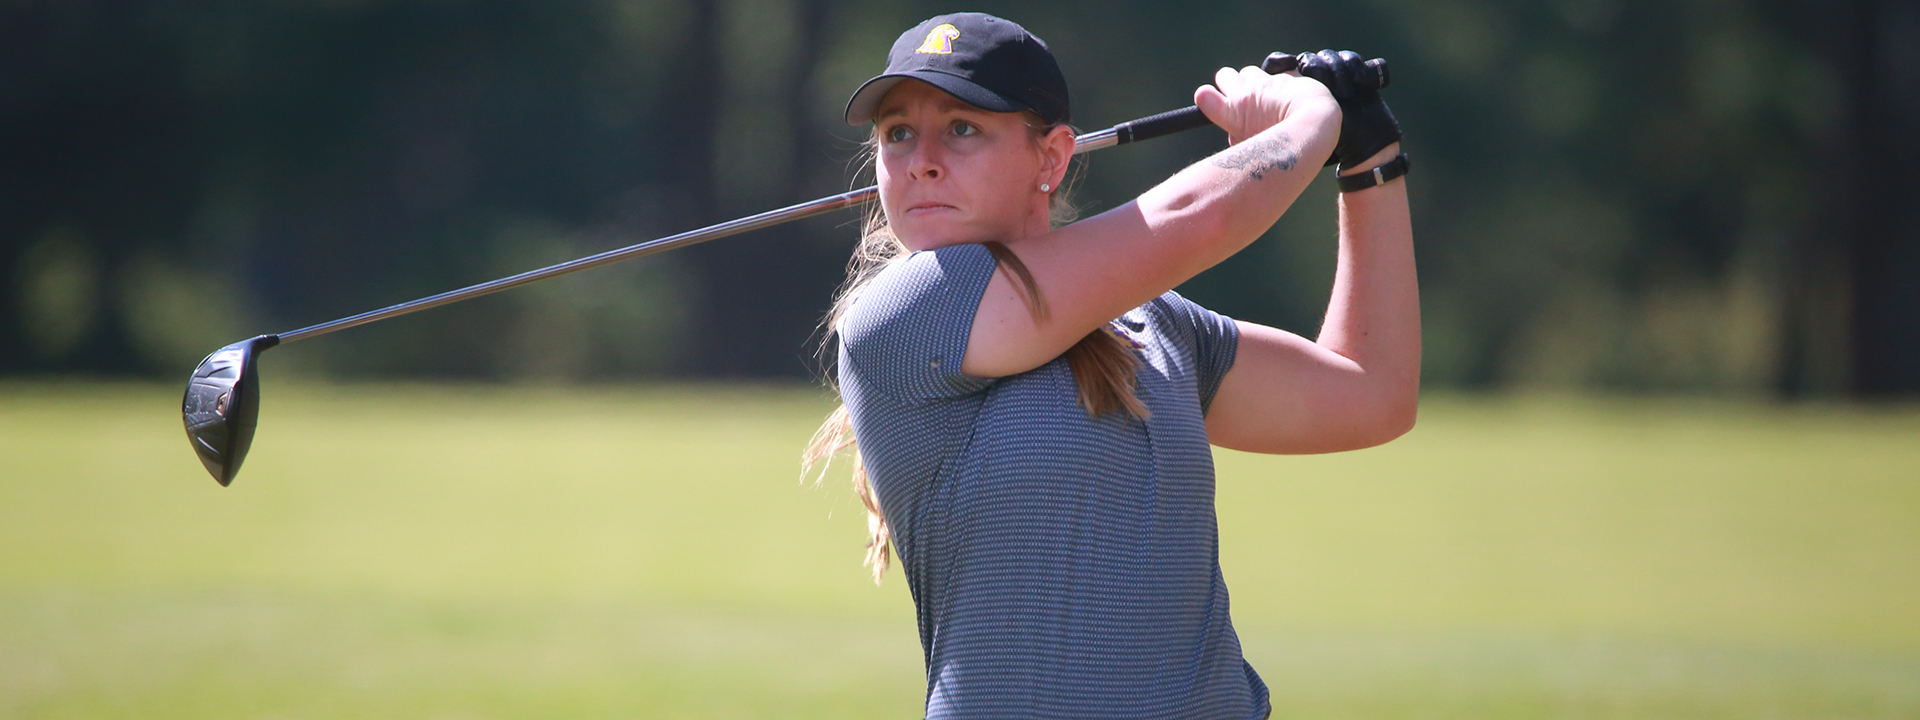 Golden Eagle women's golf team to kick off 2020-21 season with spring schedule